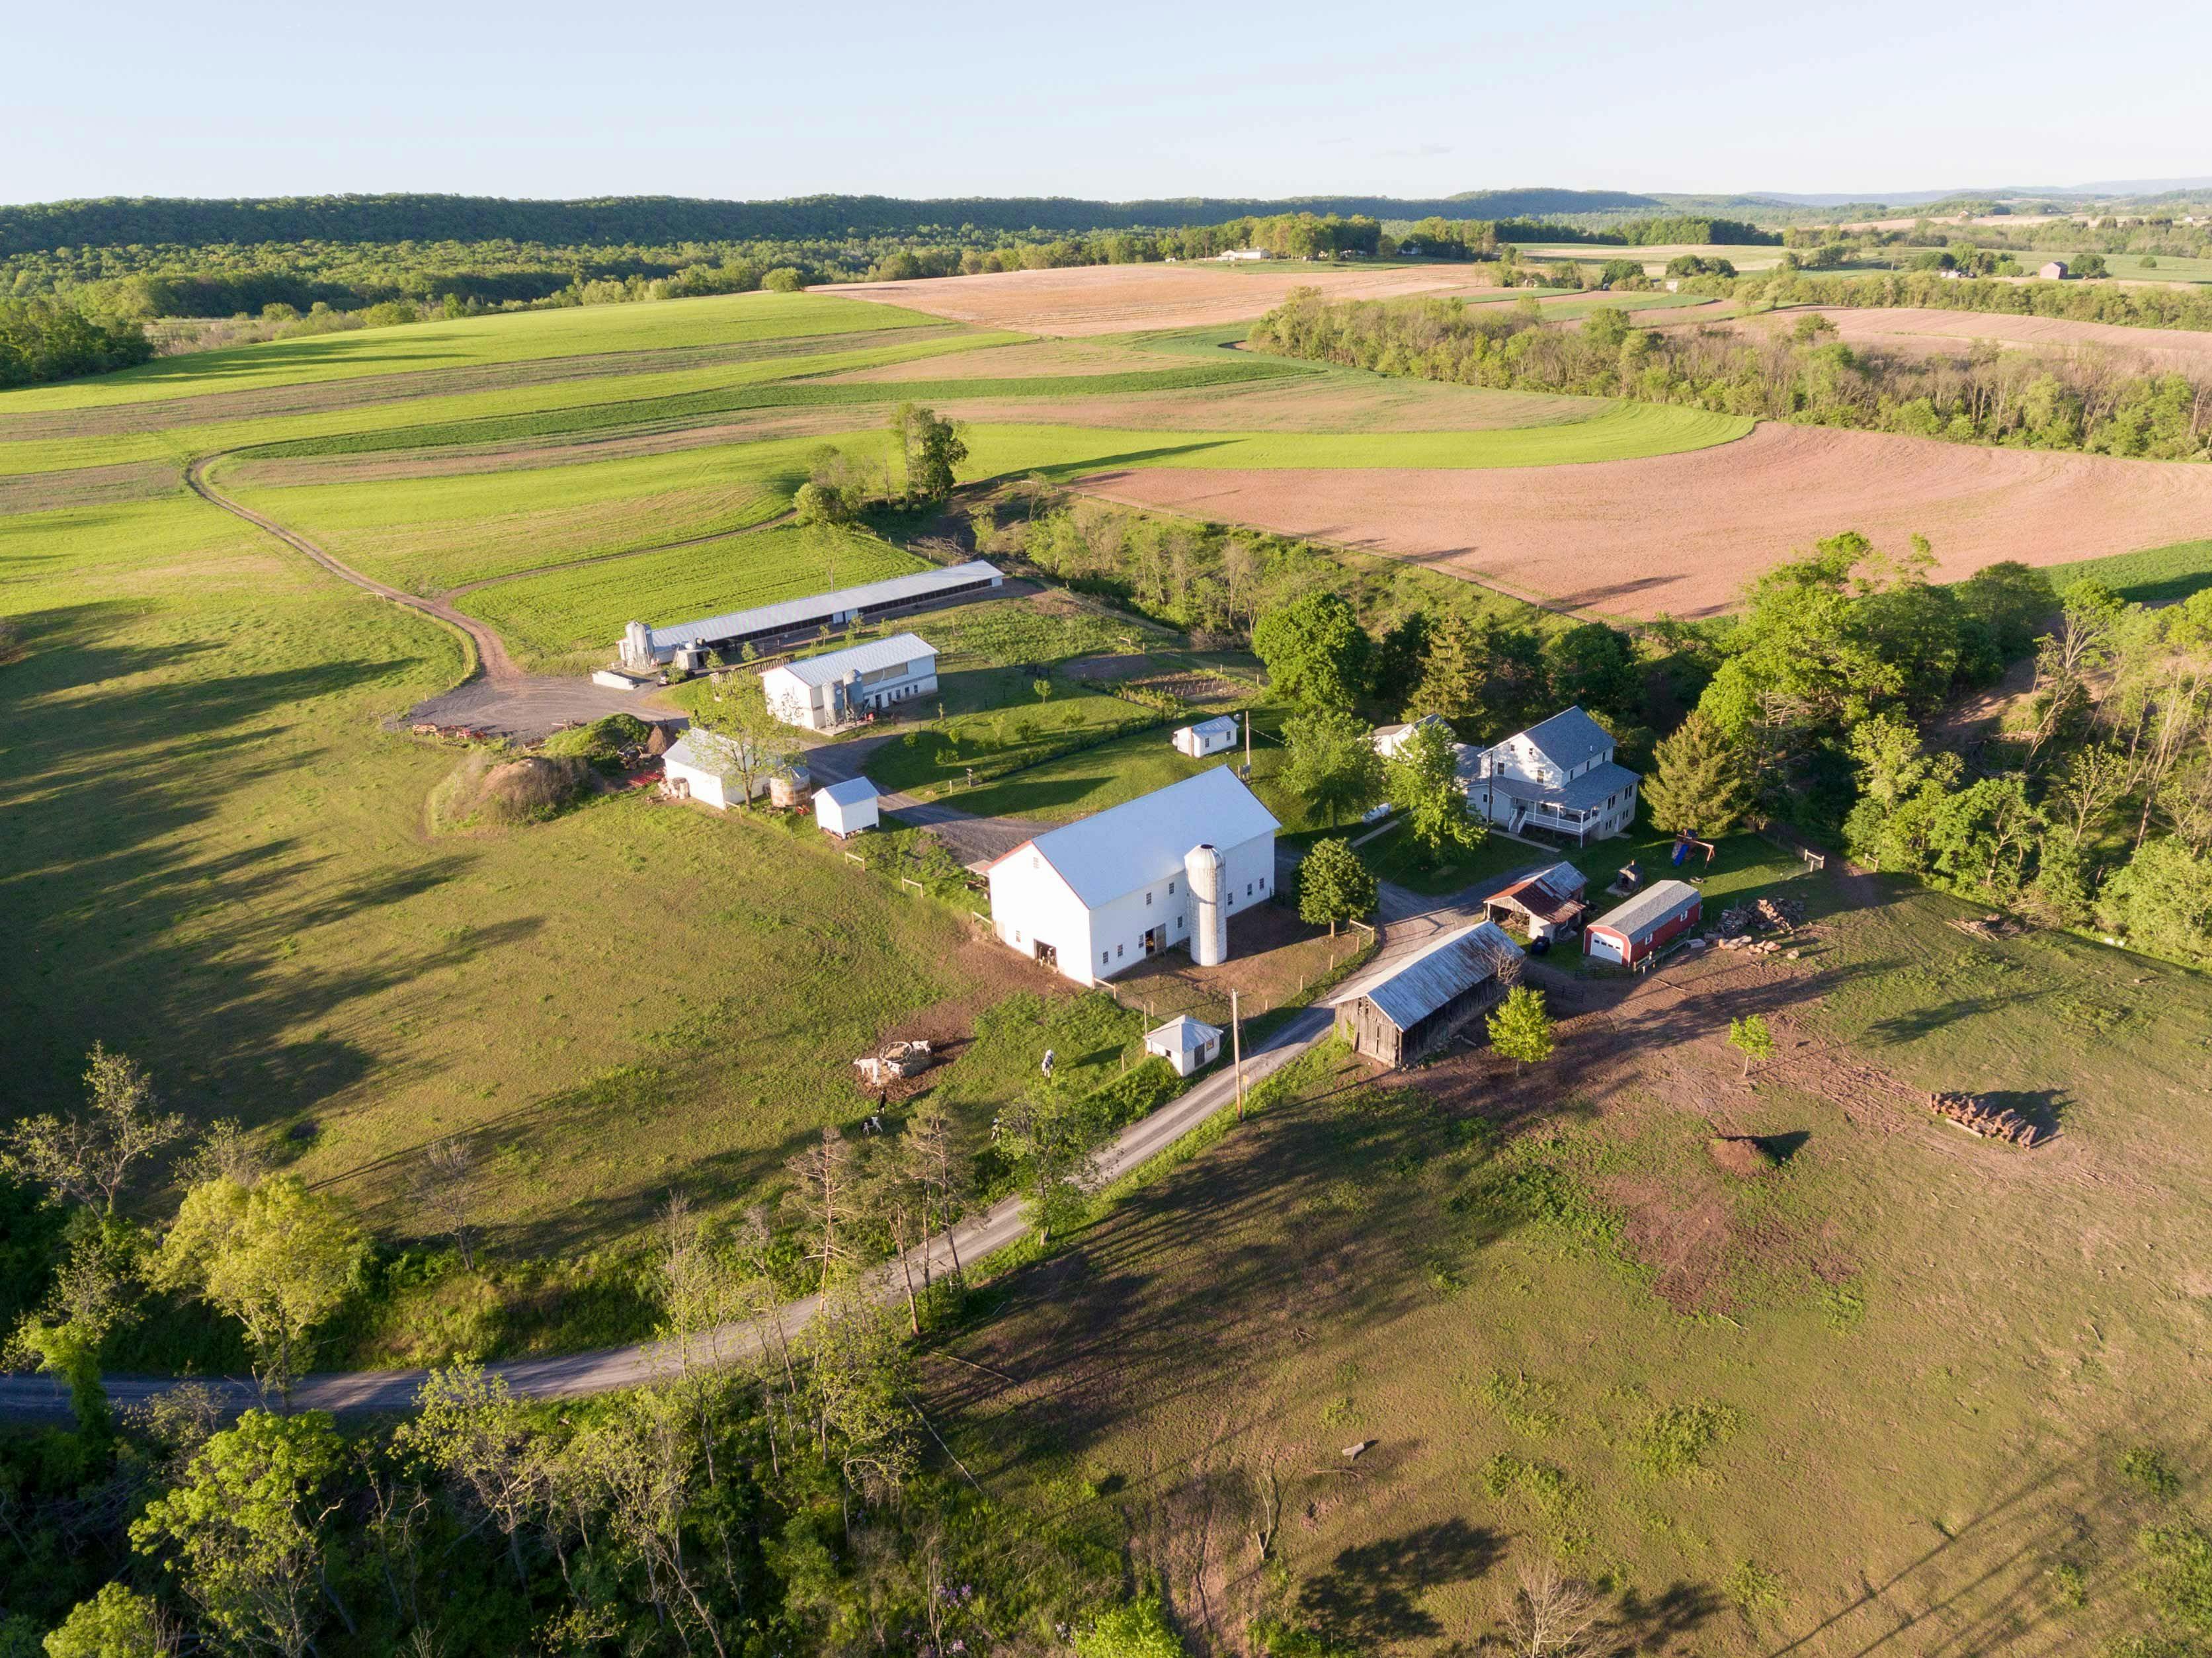 An overview of the Glick's Organic Valley family farm